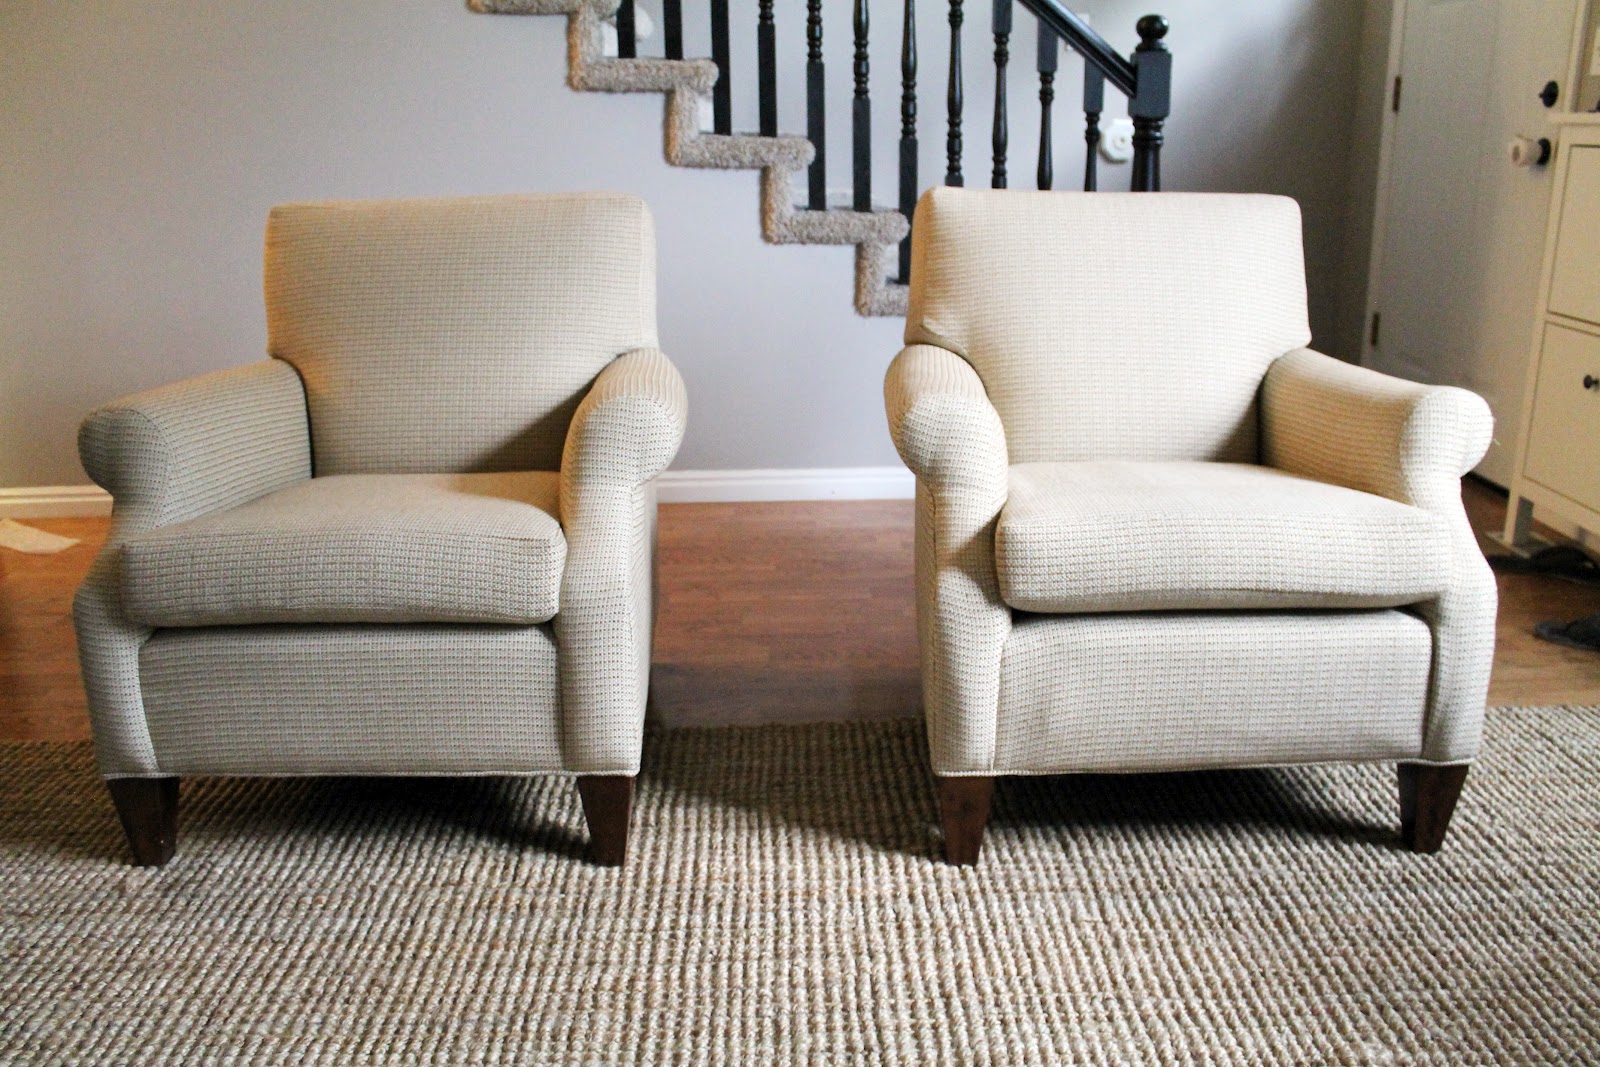 matching living room chairs